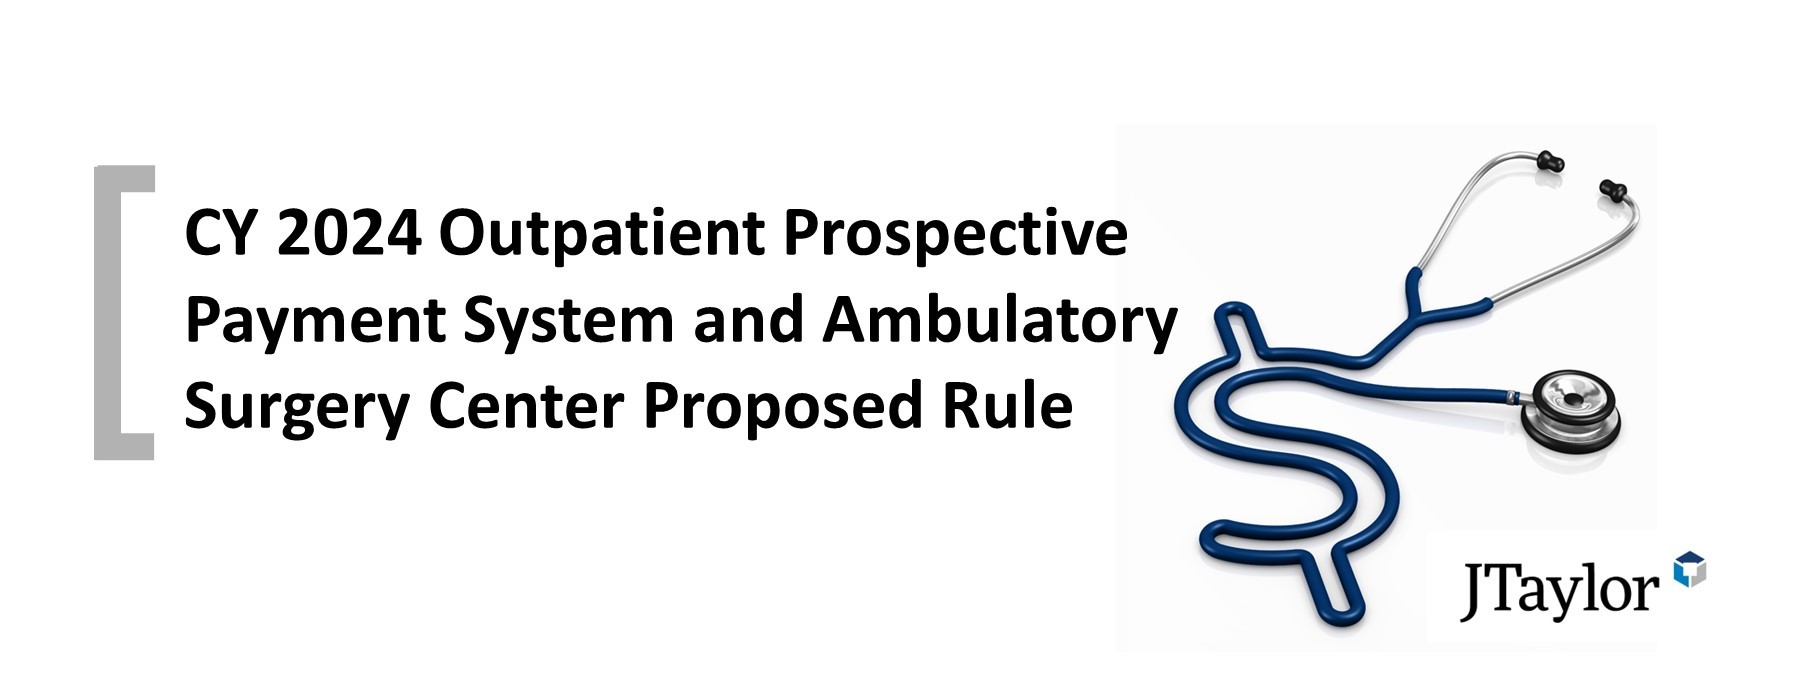 CY 2024 Outpatient Prospective Payment System and Ambulatory Surgery Center Proposed Rule